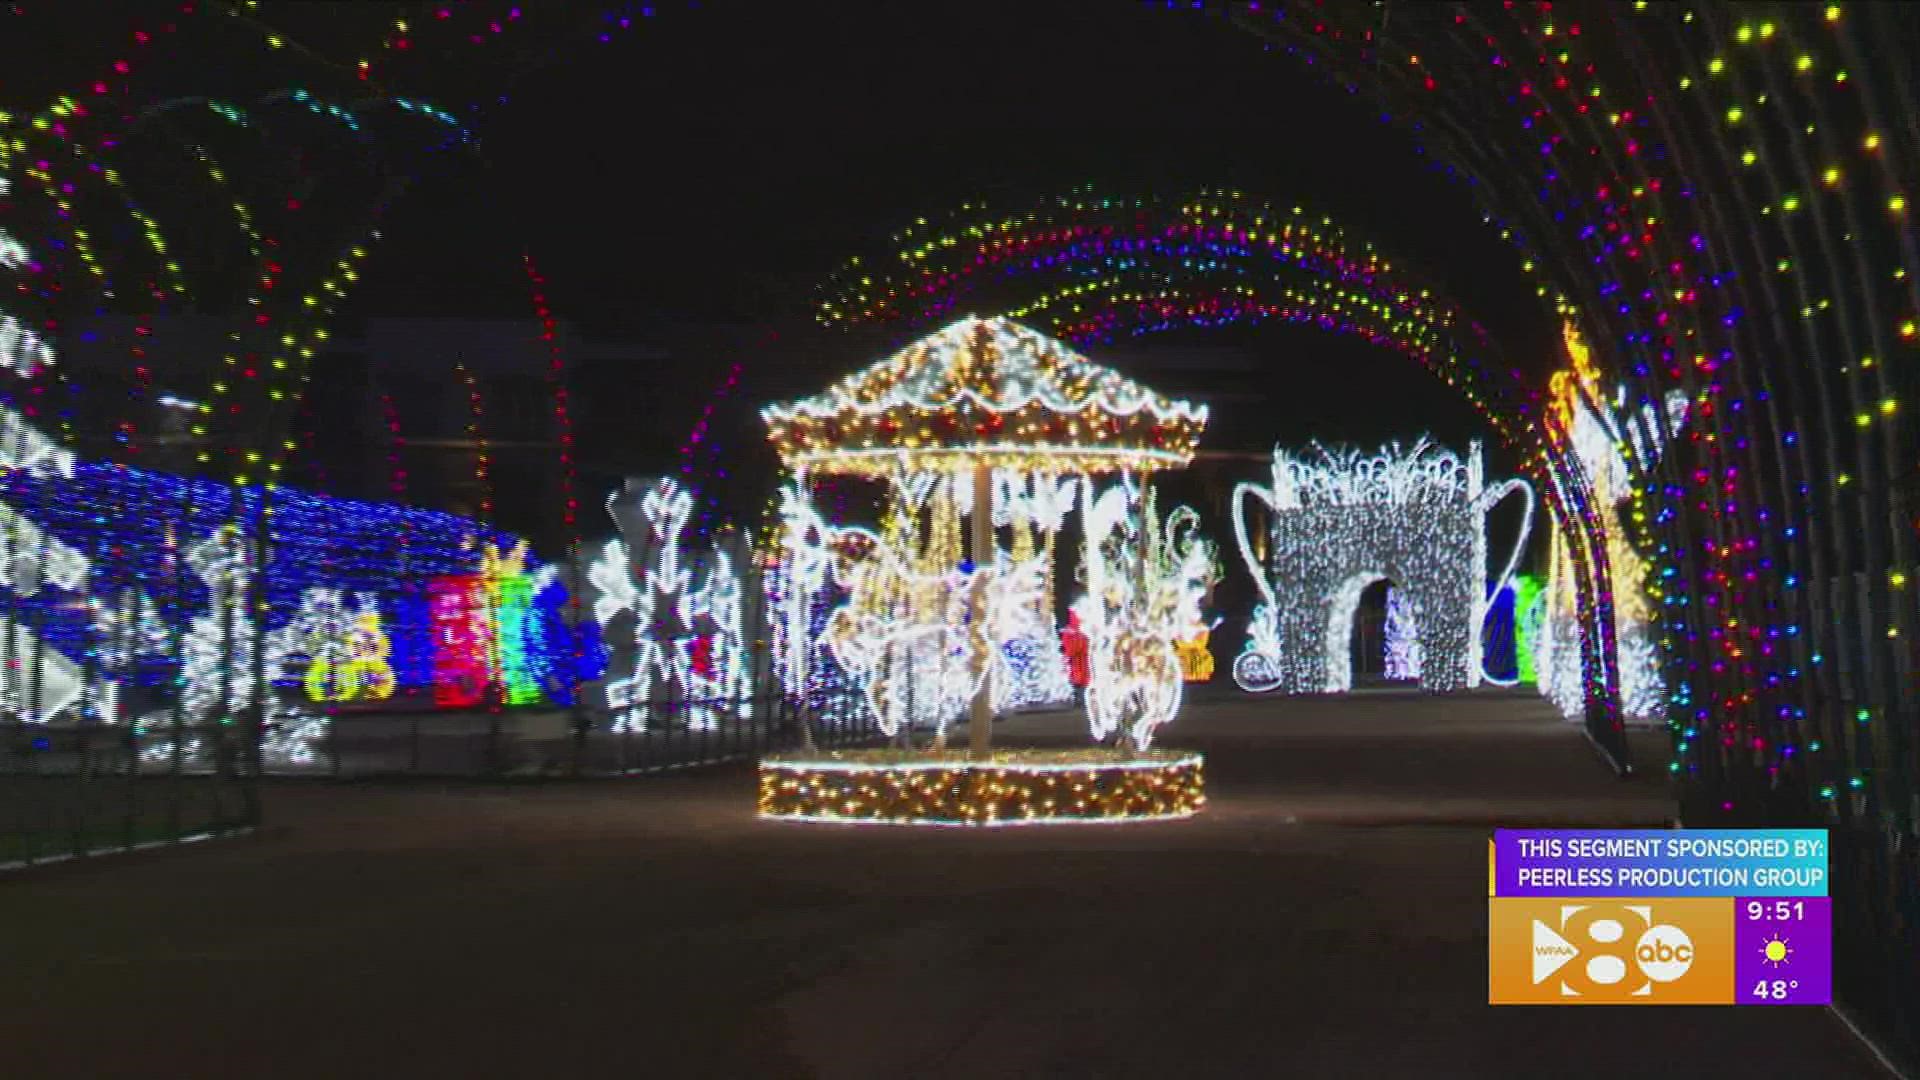 Video Holiday Light Show Set To 'Let it Go' From 'Frozen' - ABC News